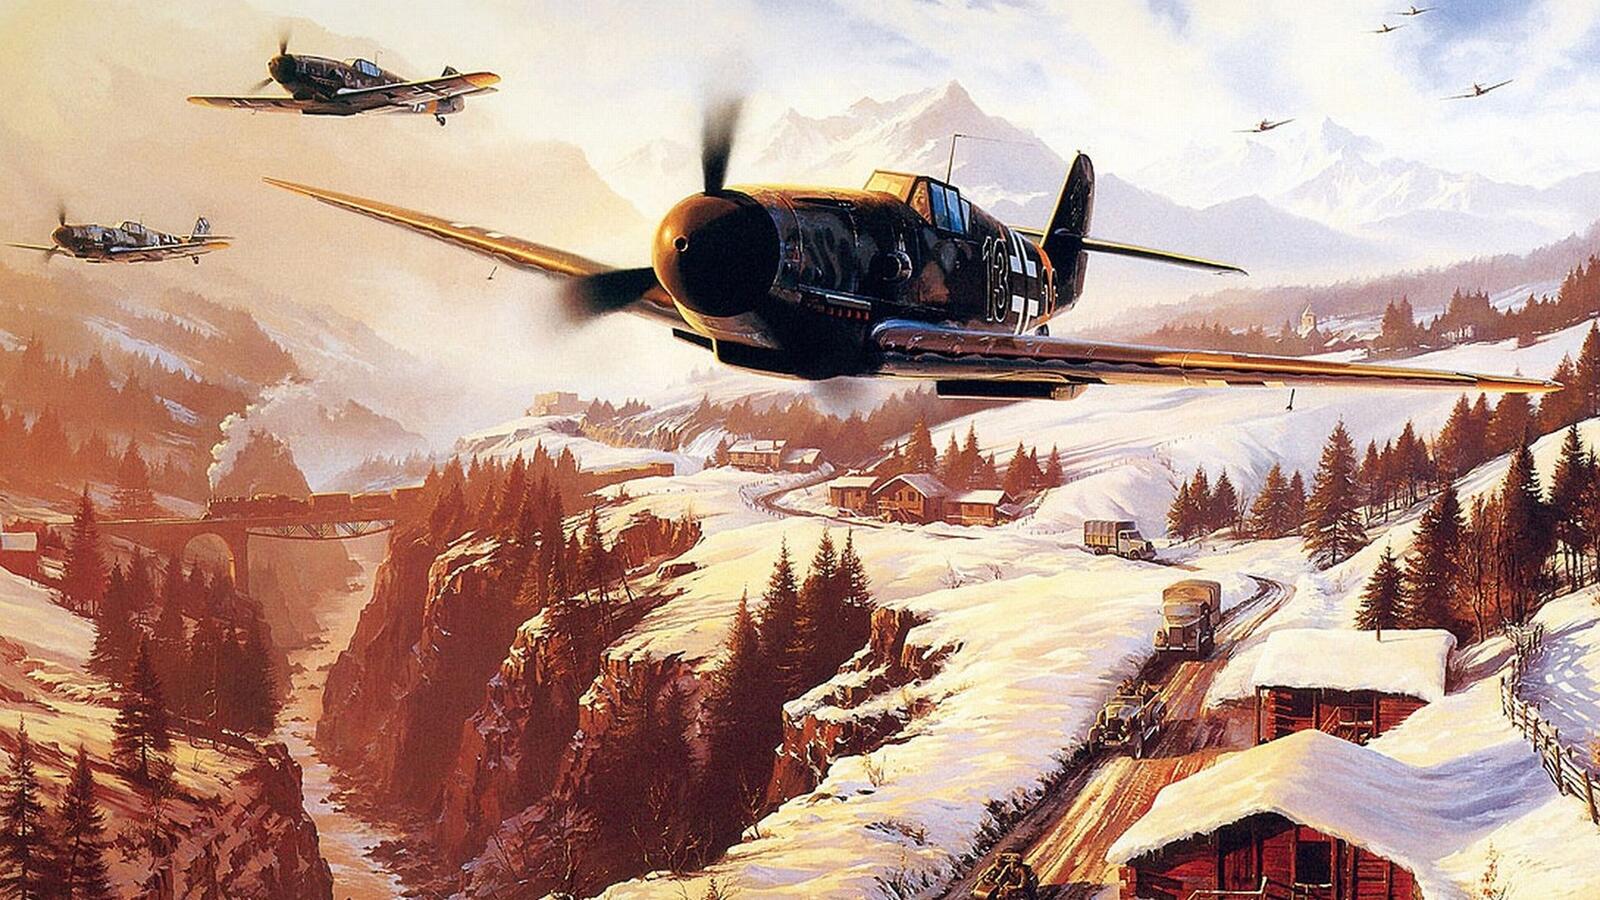 Wallpapers airplane winter offensive on the desktop